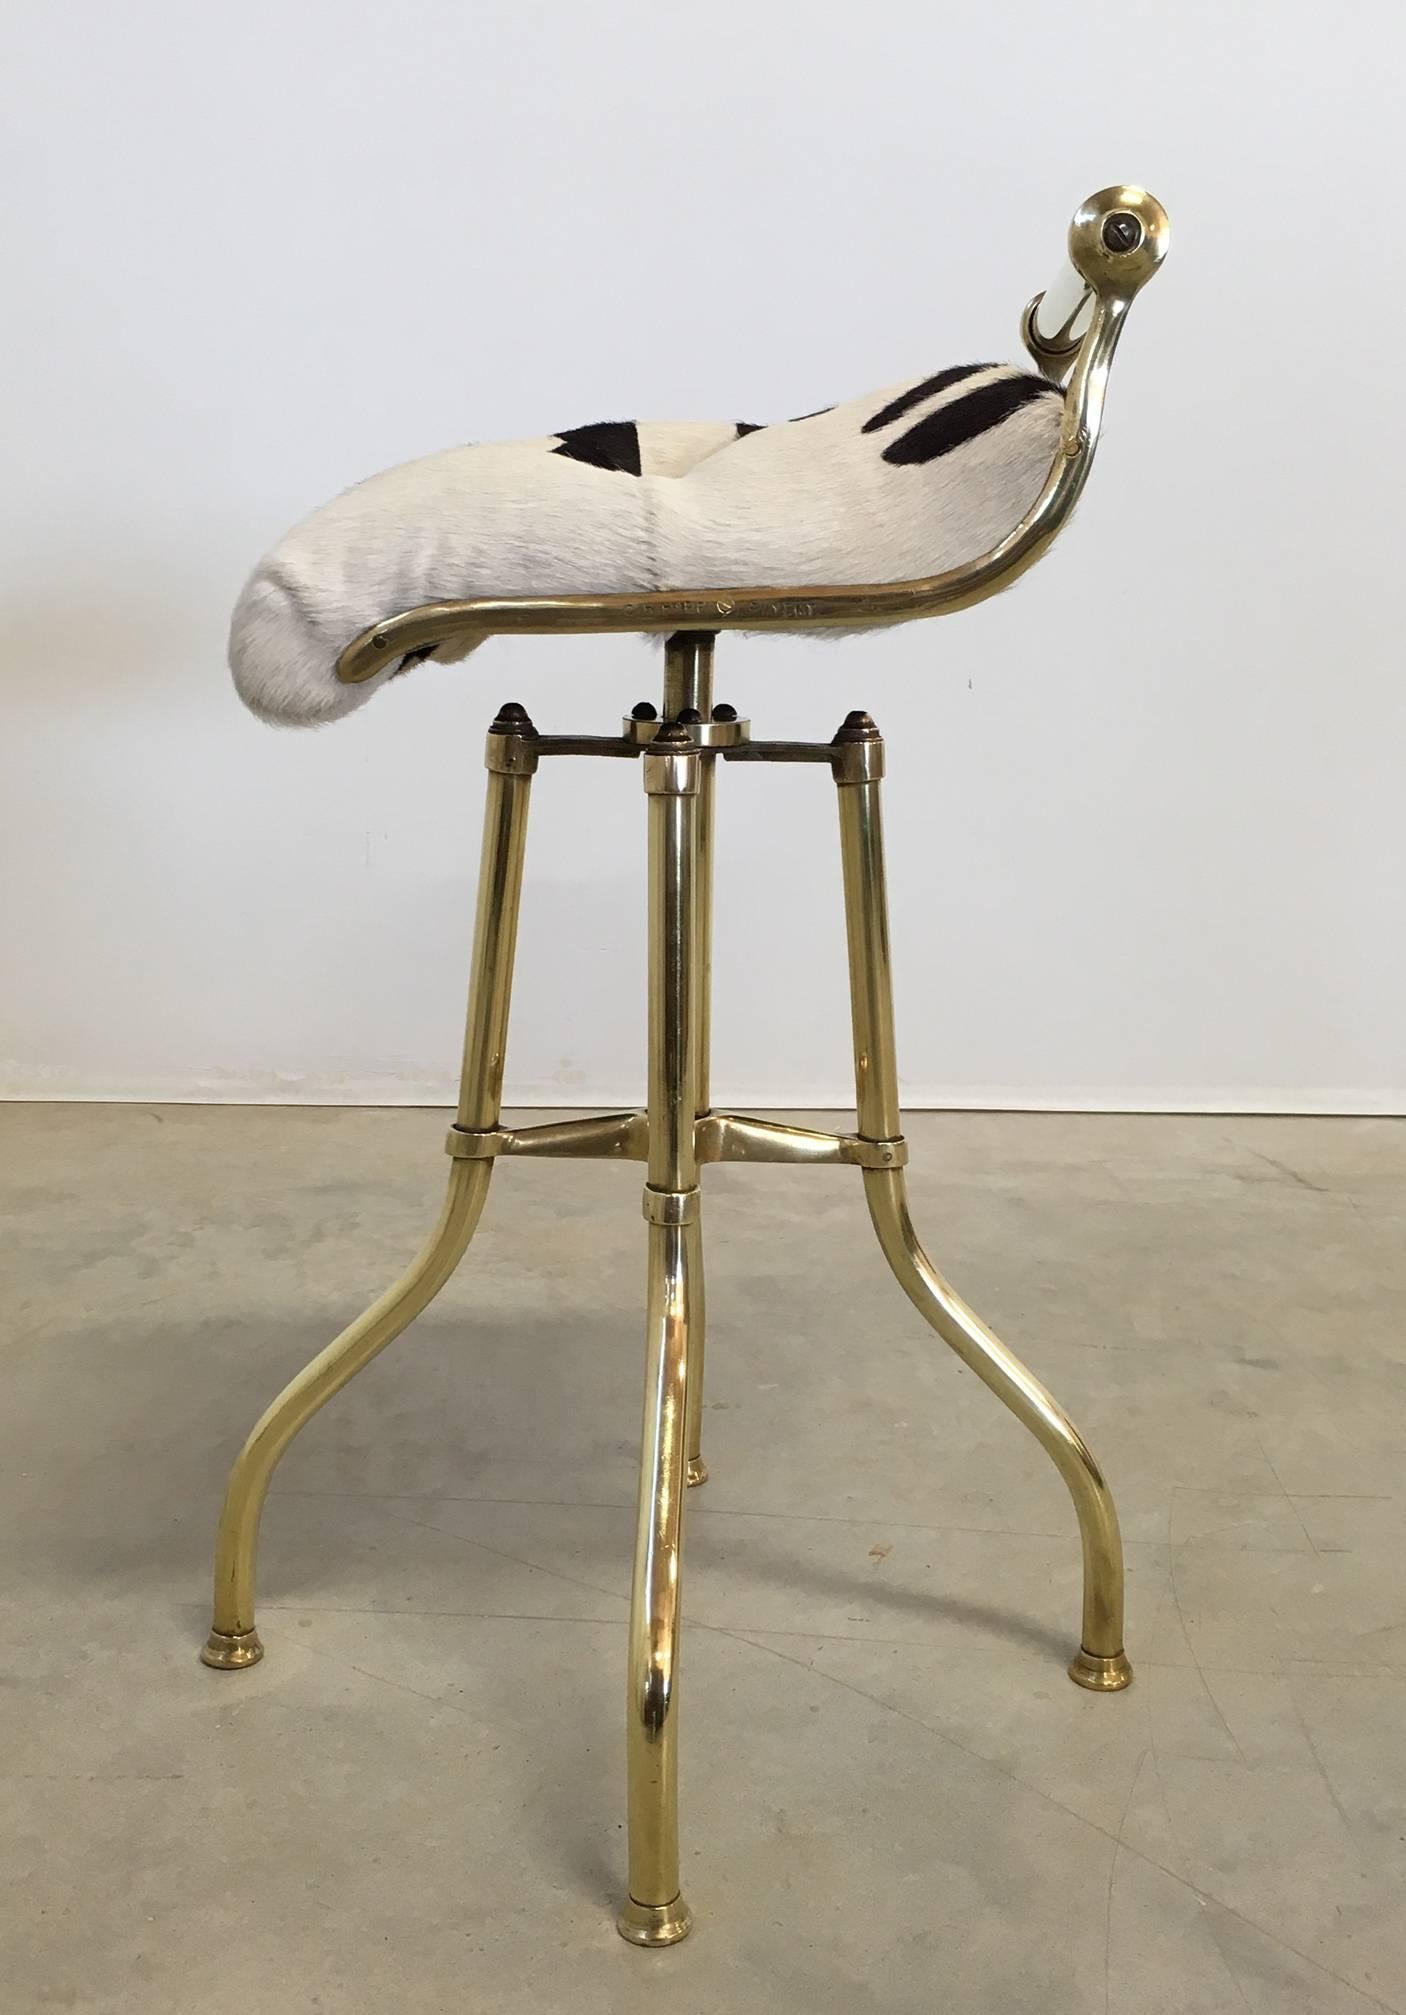 English brass revolving stool with tufted zebra print hair-on-hide seat, circa 1890. The seat swivels in all directions and the height is adjustable 24 to 28 inches. Stamped on frame, C.H. Hare, patent.